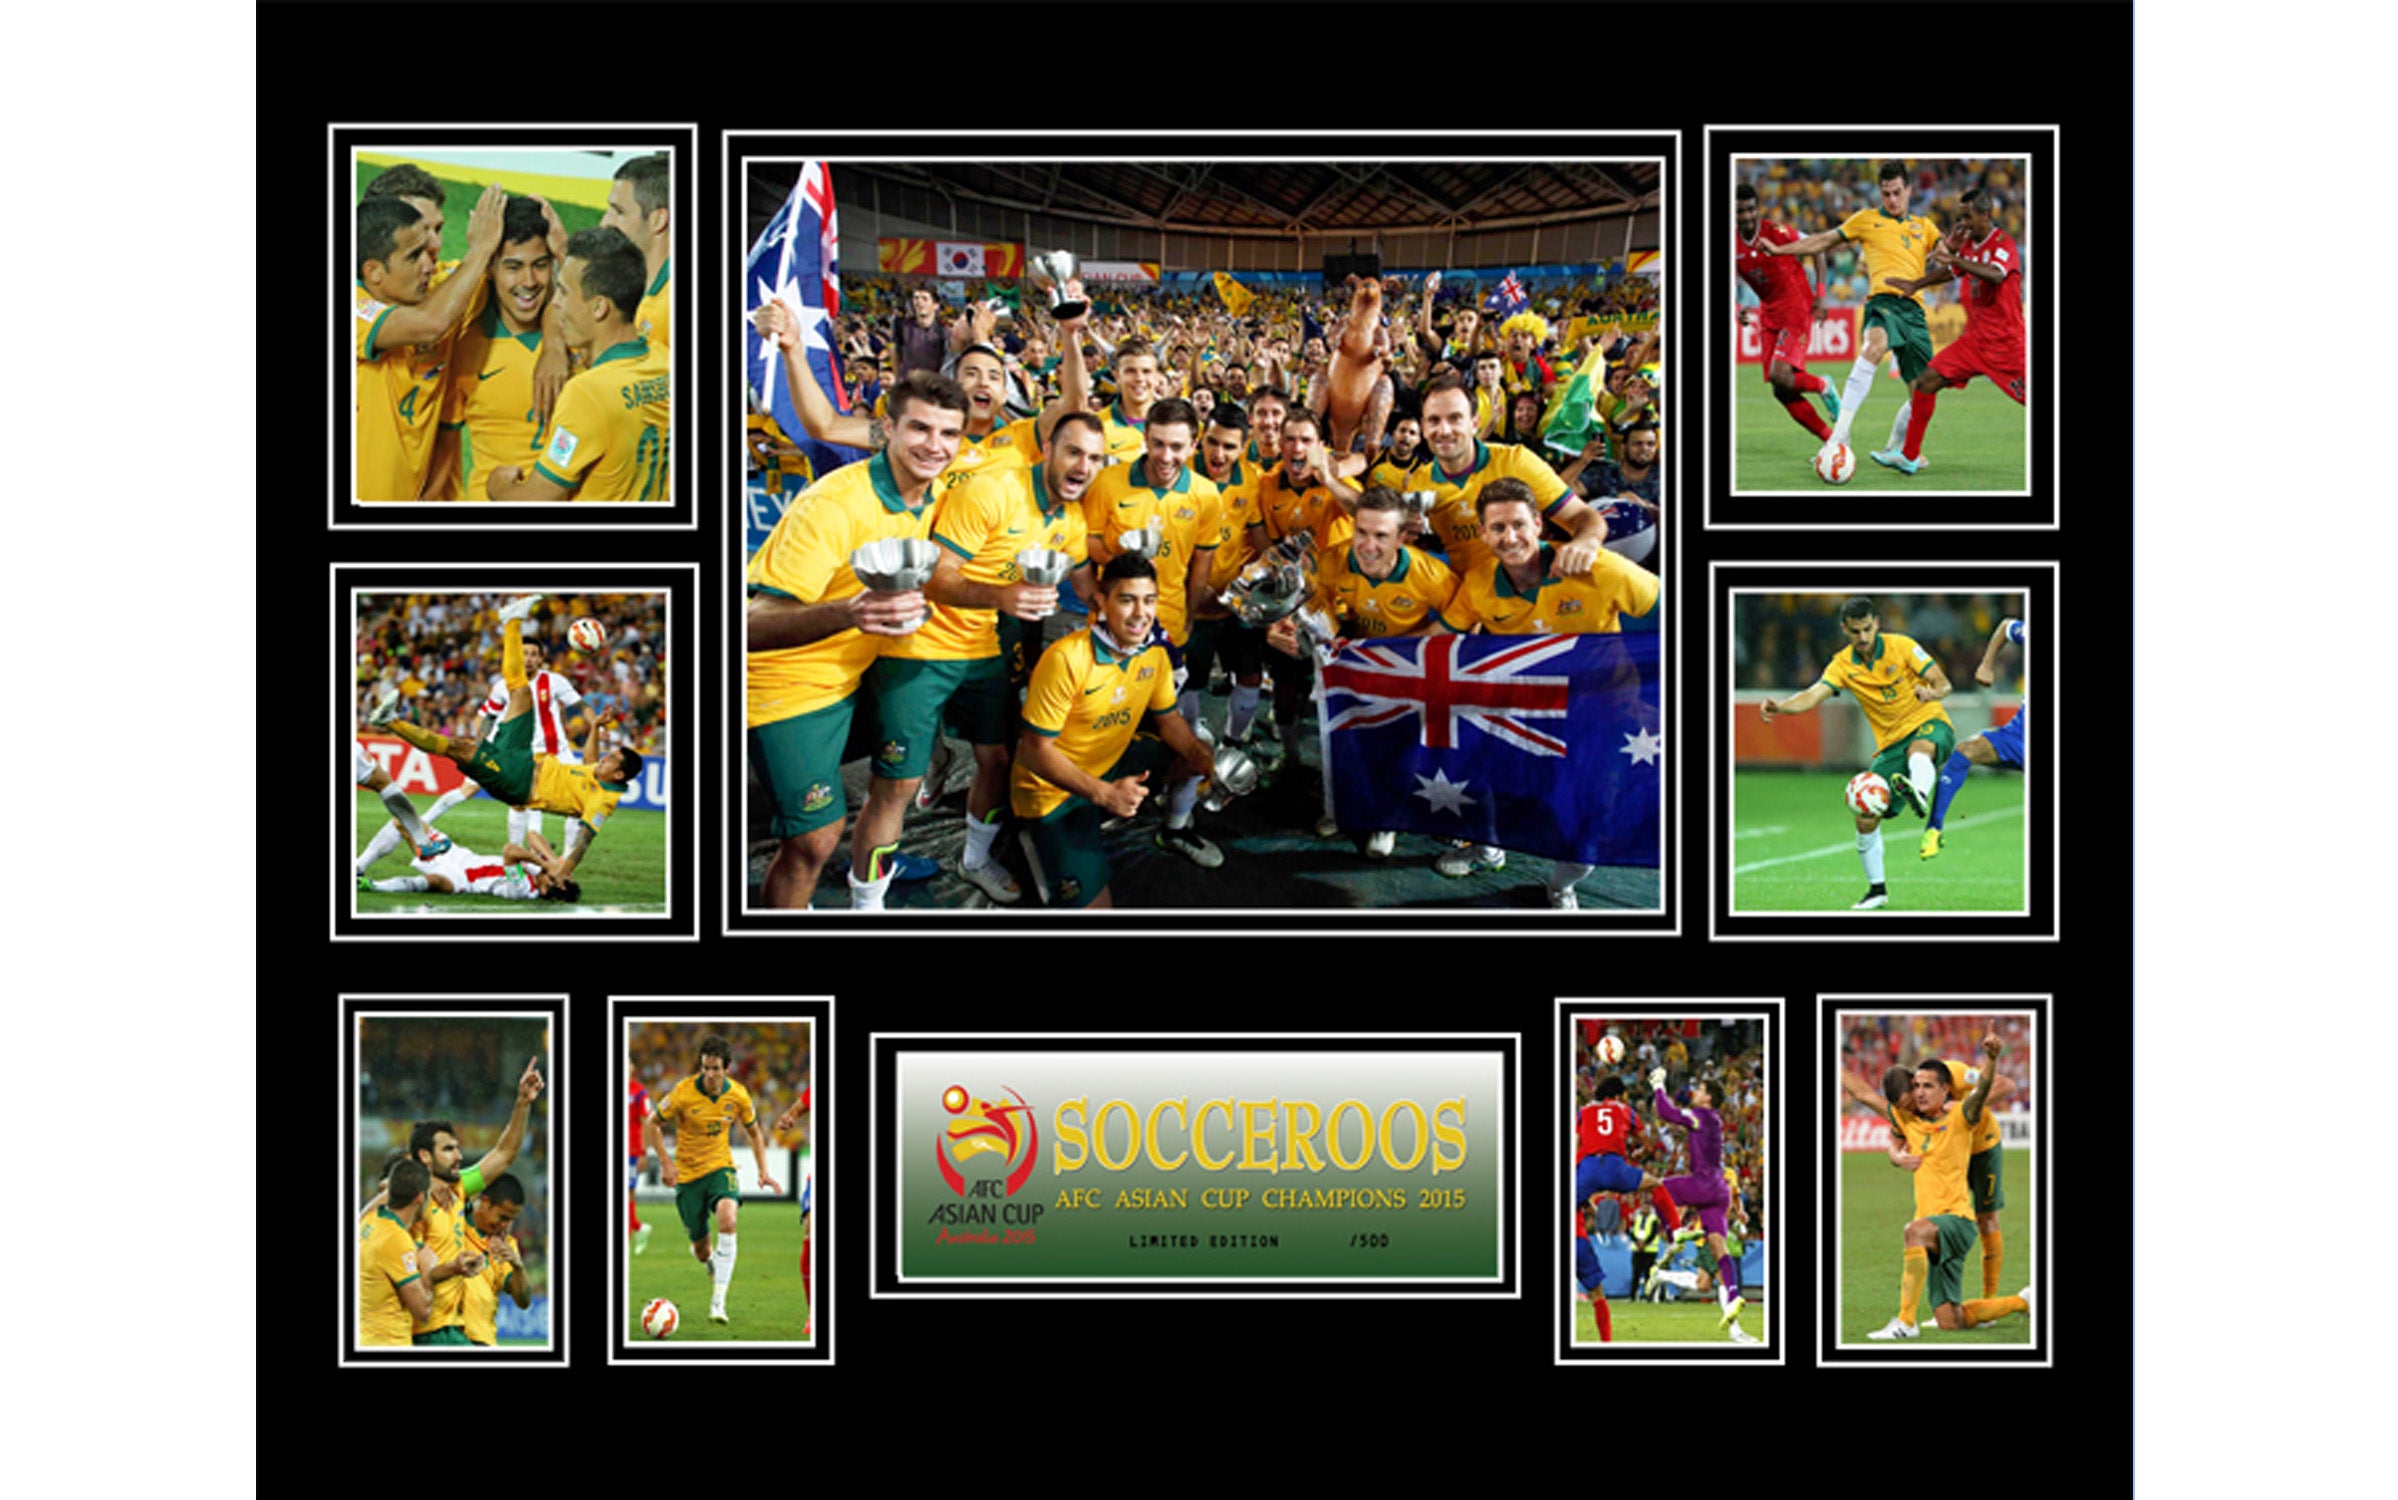 Socceroos AFC Asian Cup Champions 2015 Collage Framed